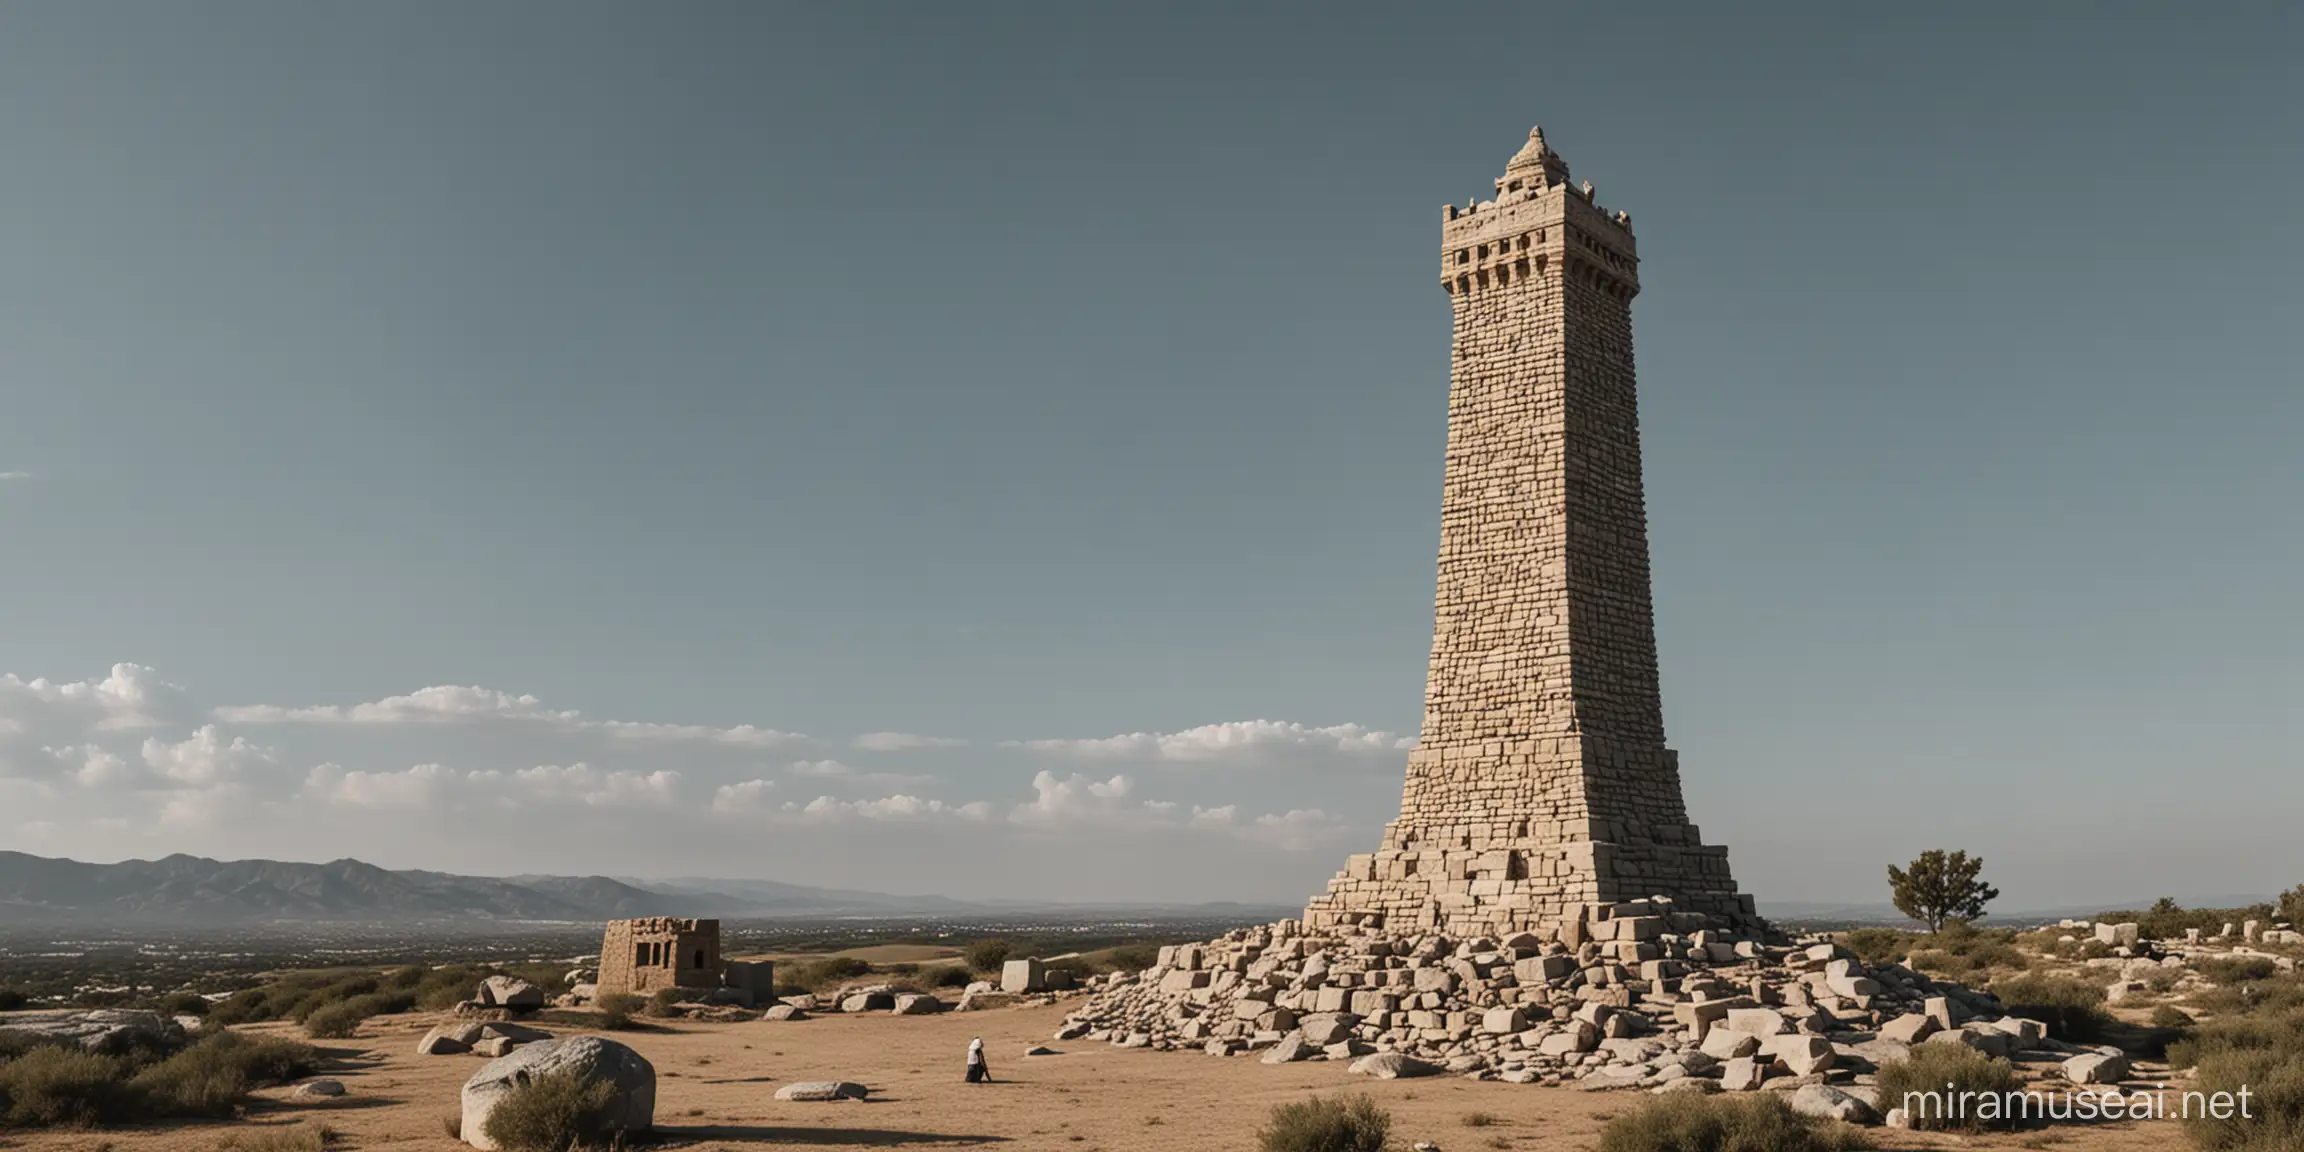 Create a Monument inspired by phrase "Tower of Wisdom"
